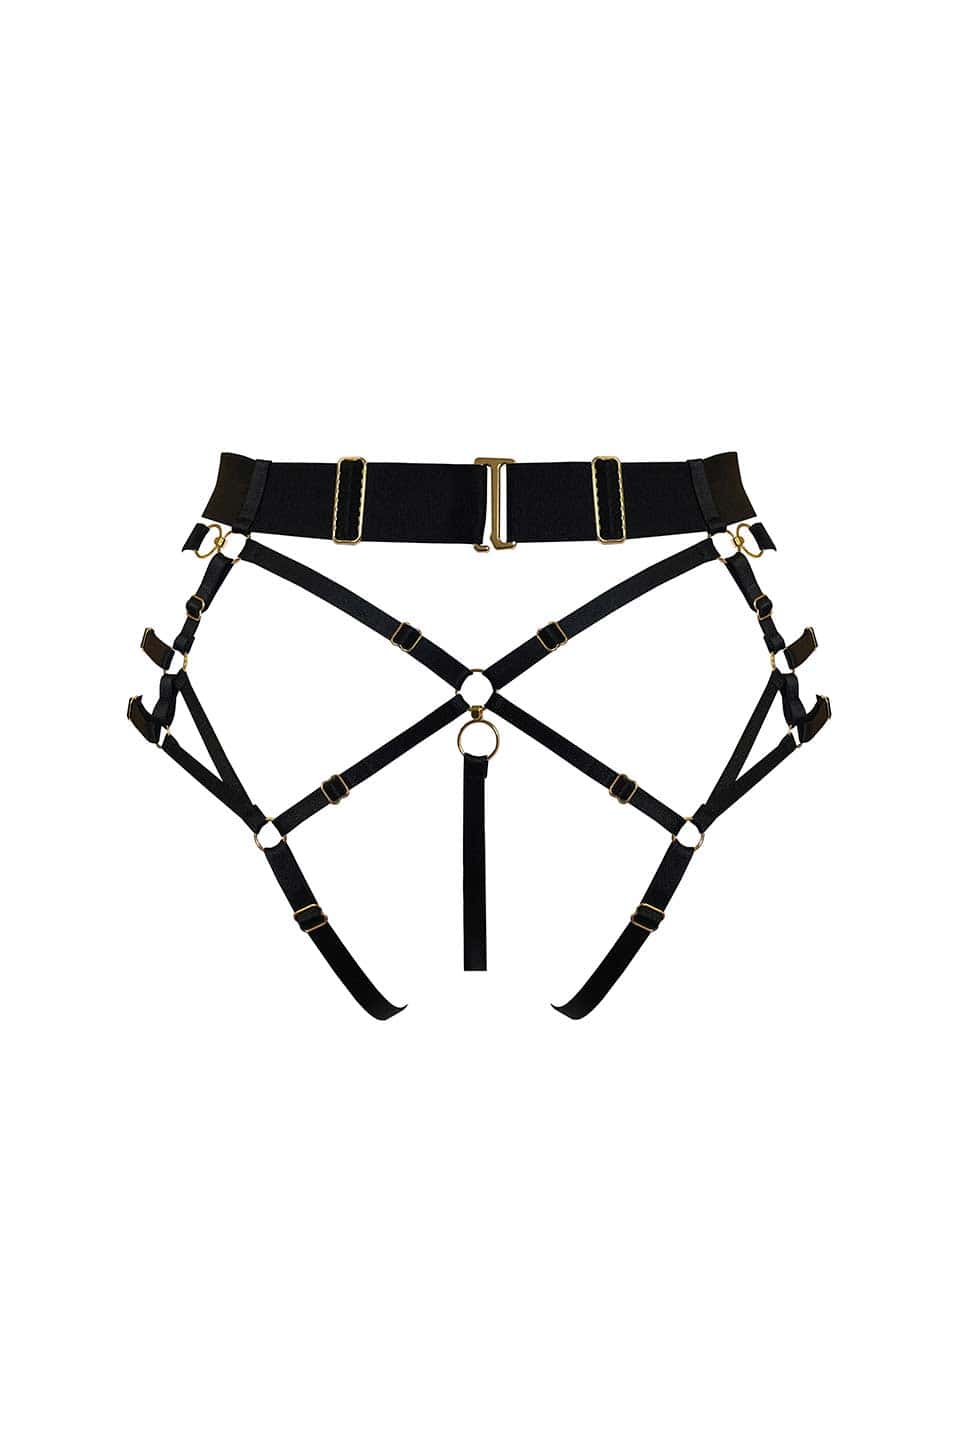 Atelier bordelle kora multi style harness brief without thong black